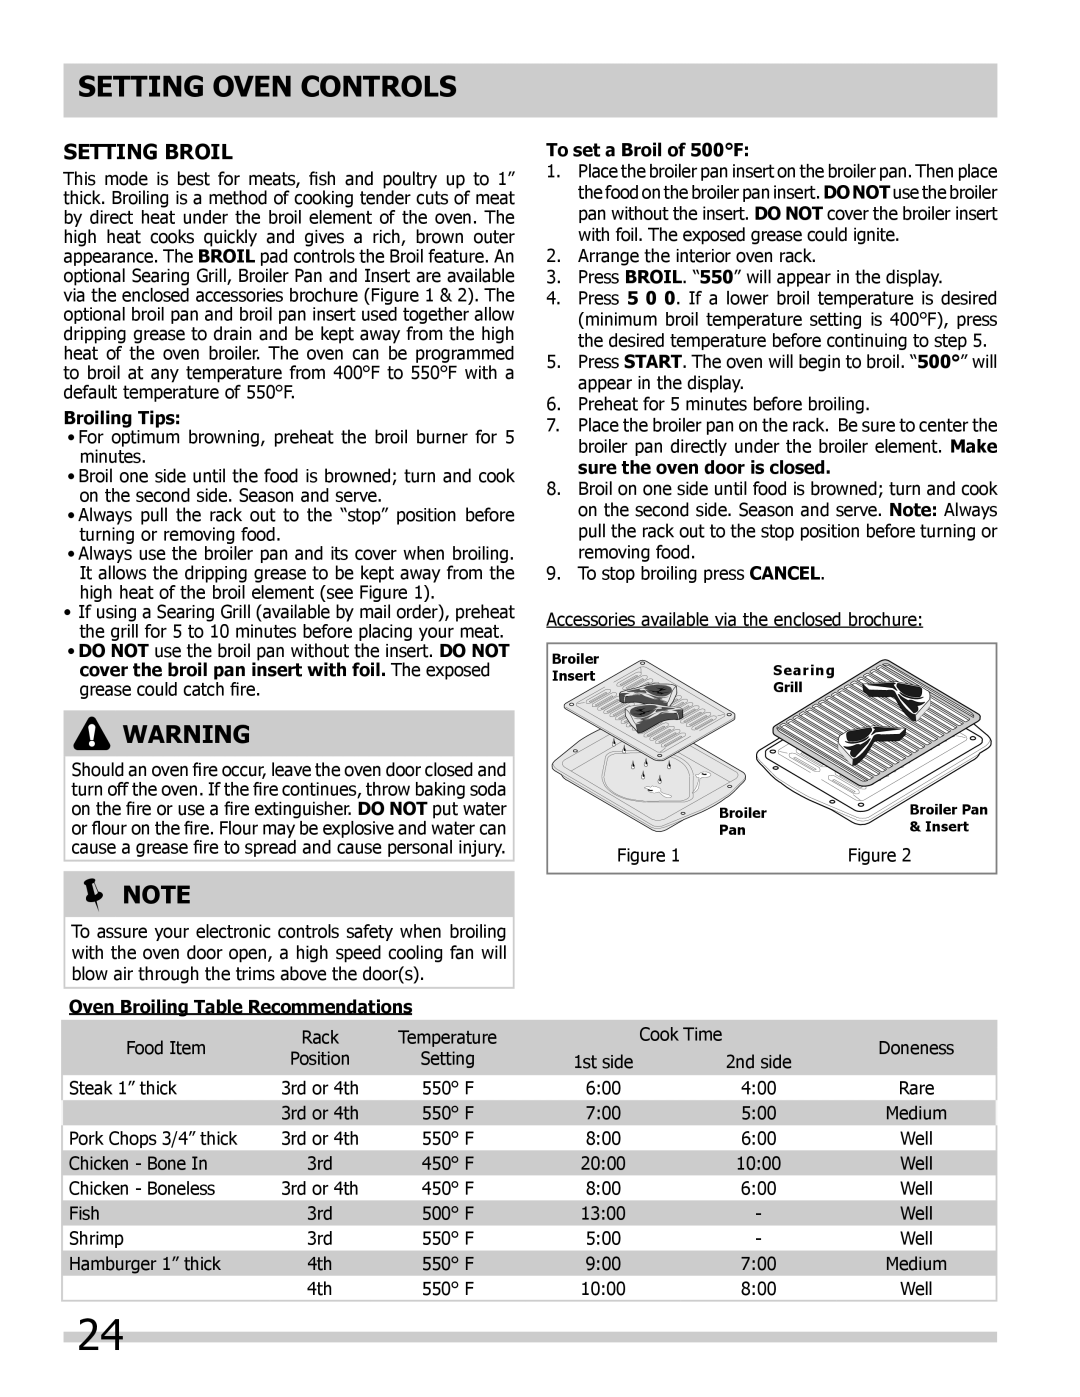 Frigidaire FGGS3045KB Setting Broil, Broiling Tips, Oven Broiling Table Recommendations, To set a Broil of 500F, Note 